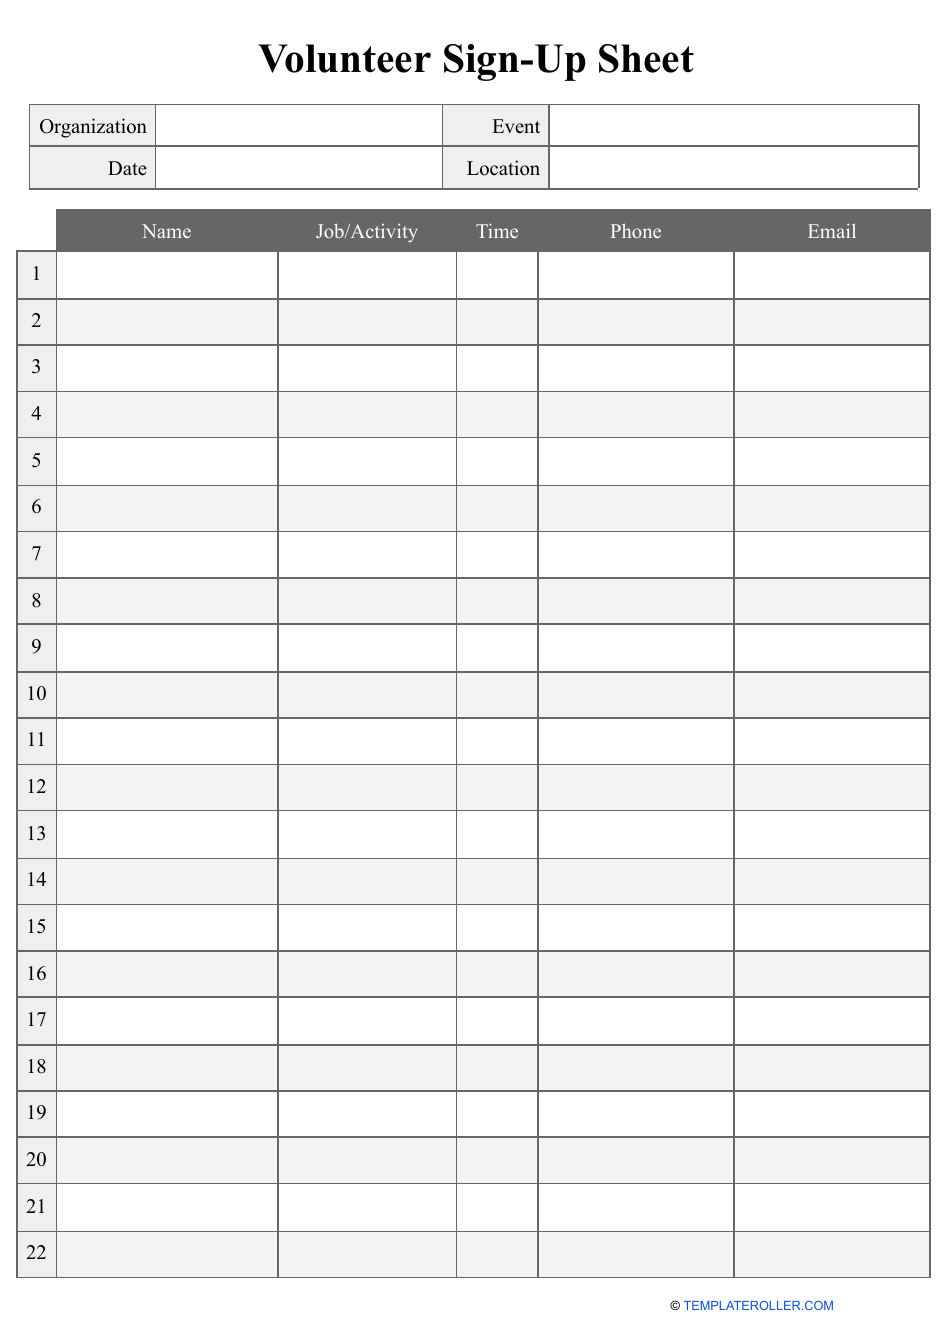 Volunteer Sign-Up Sheet Template, Page 1